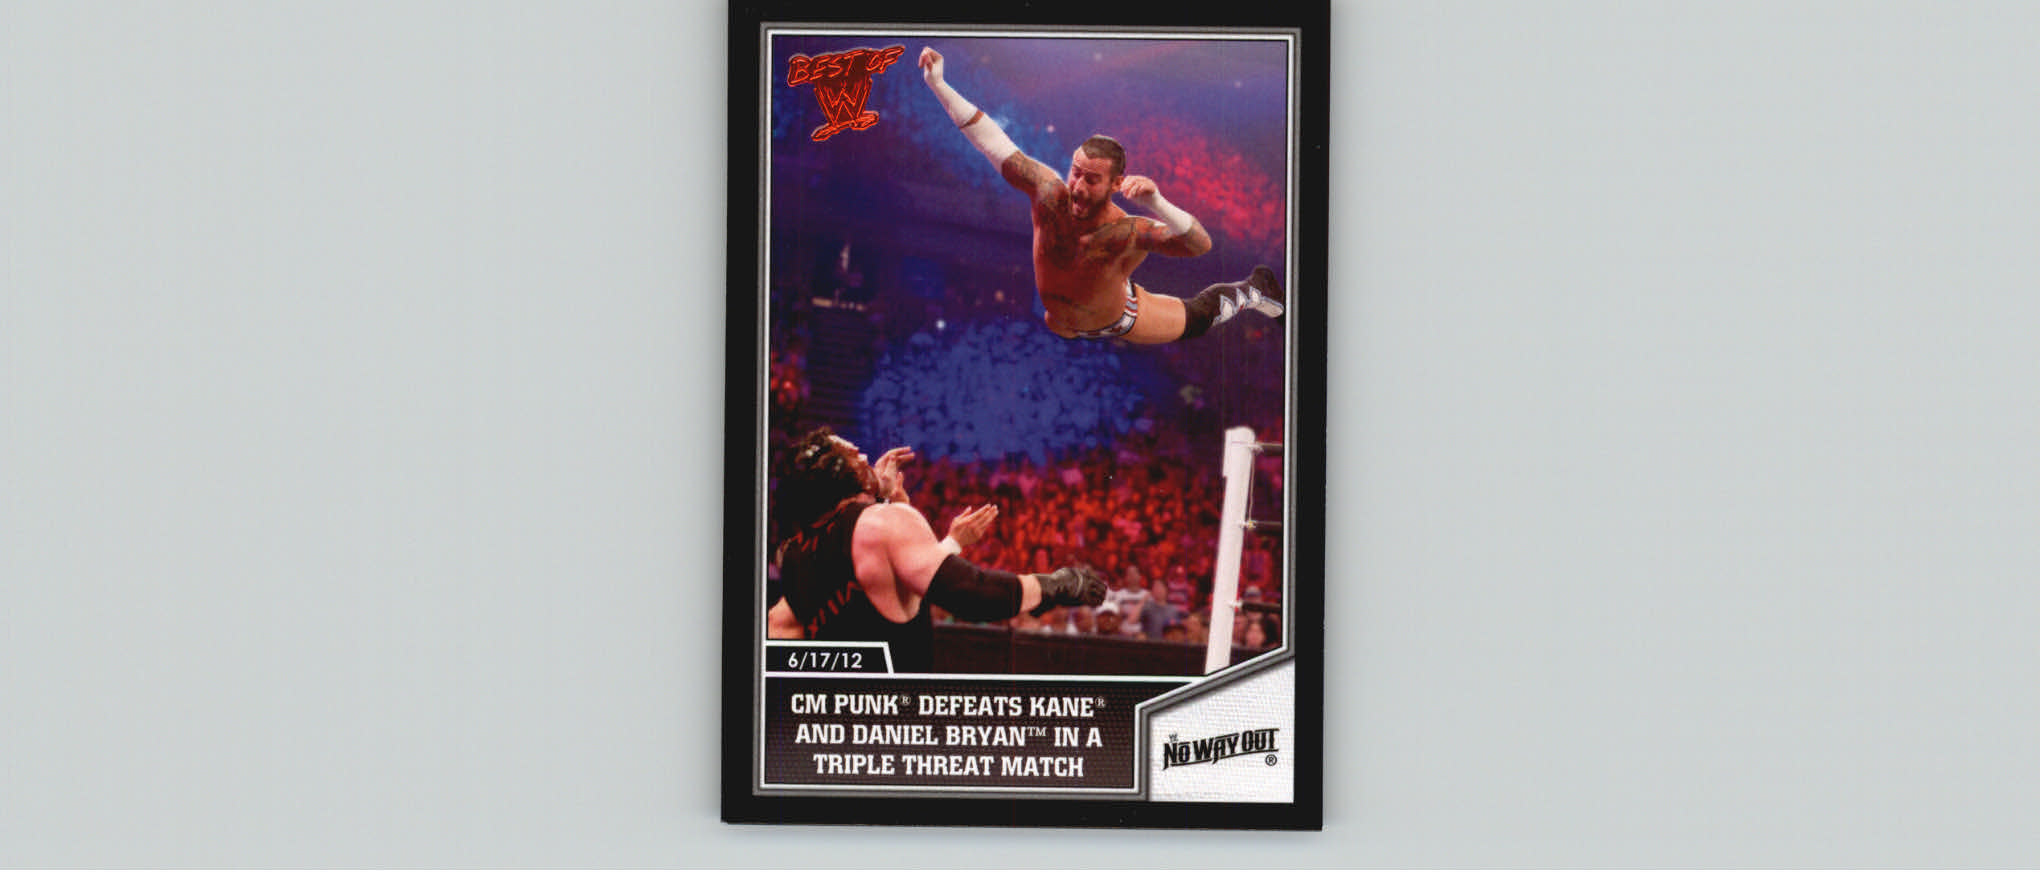 2013 Topps Best of WWE #18 CM Punk Defeats Kane and Daniel Bryan in a Triple Threat Match